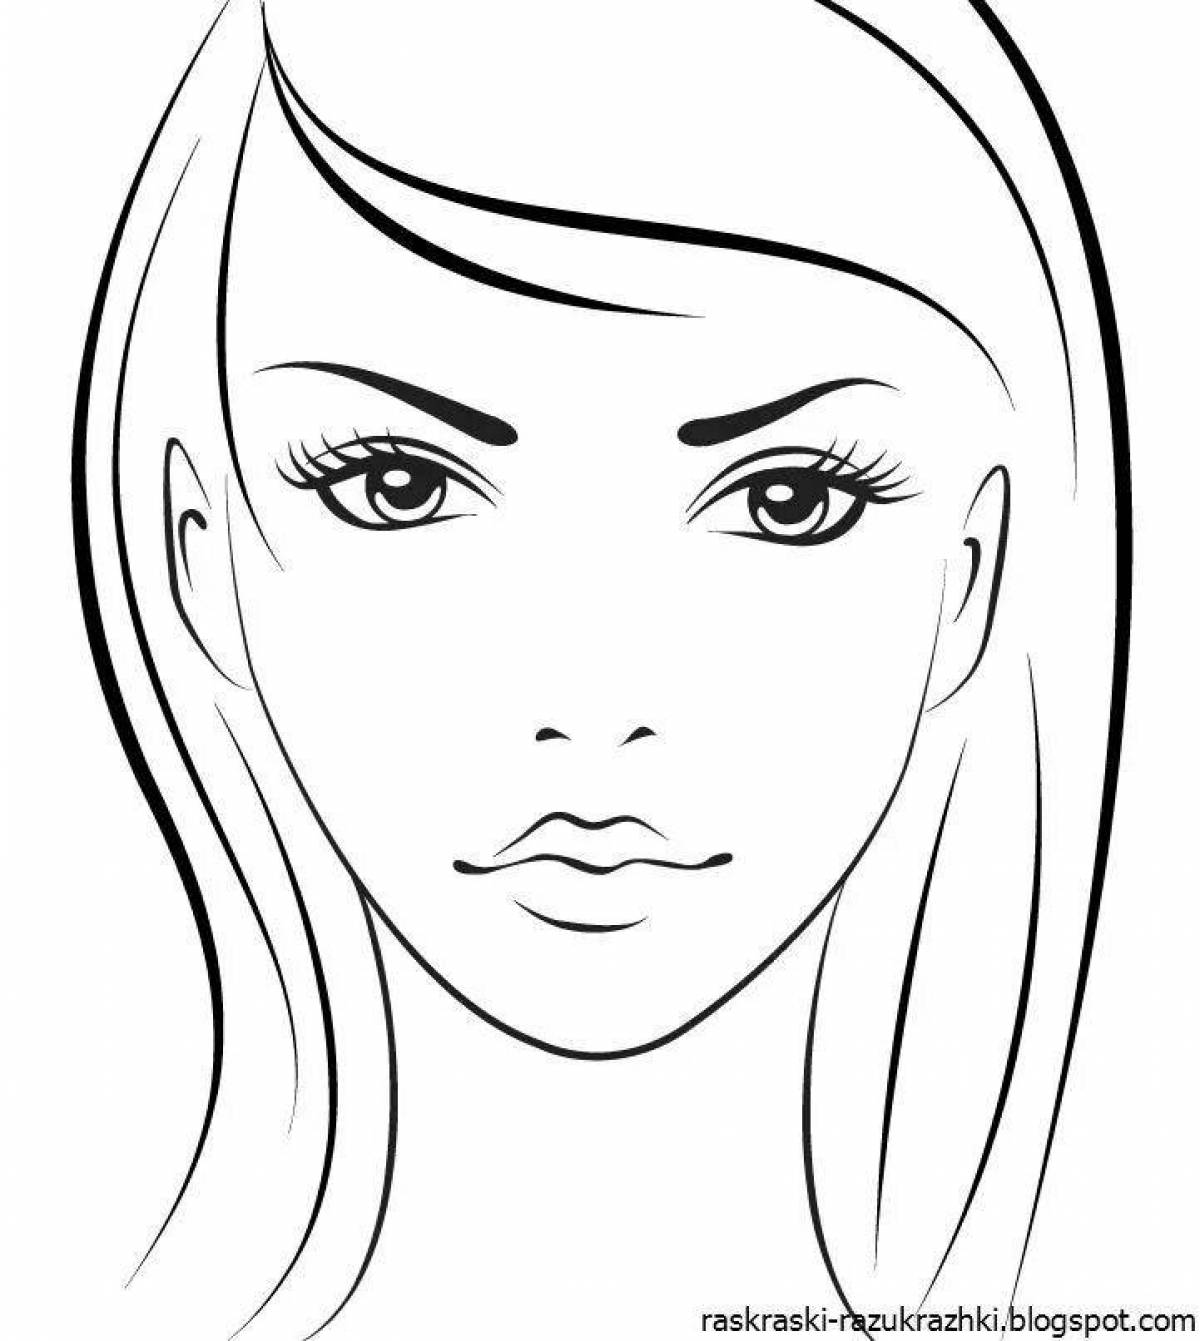 Colored make-up coloring pages